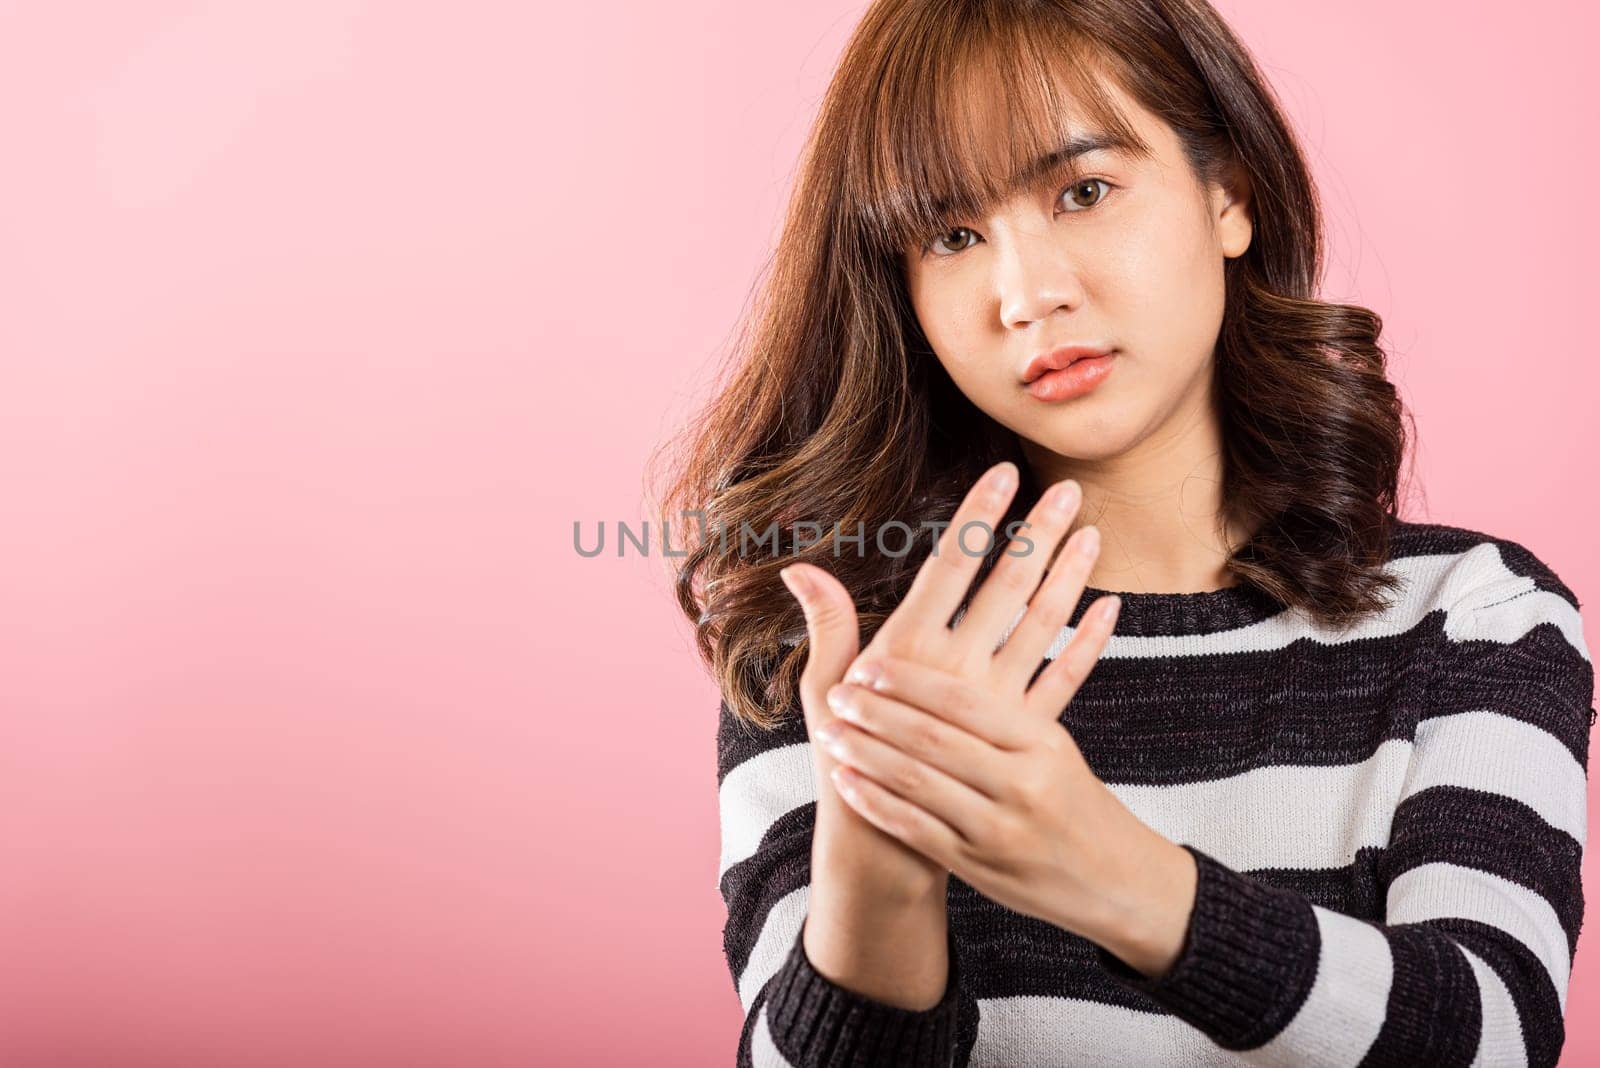 Portrait of Asian beautiful young woman suffering from pain in palm or hands and massaging her painful hands, studio shot isolated on pink background, Health care arthritis concept by Sorapop